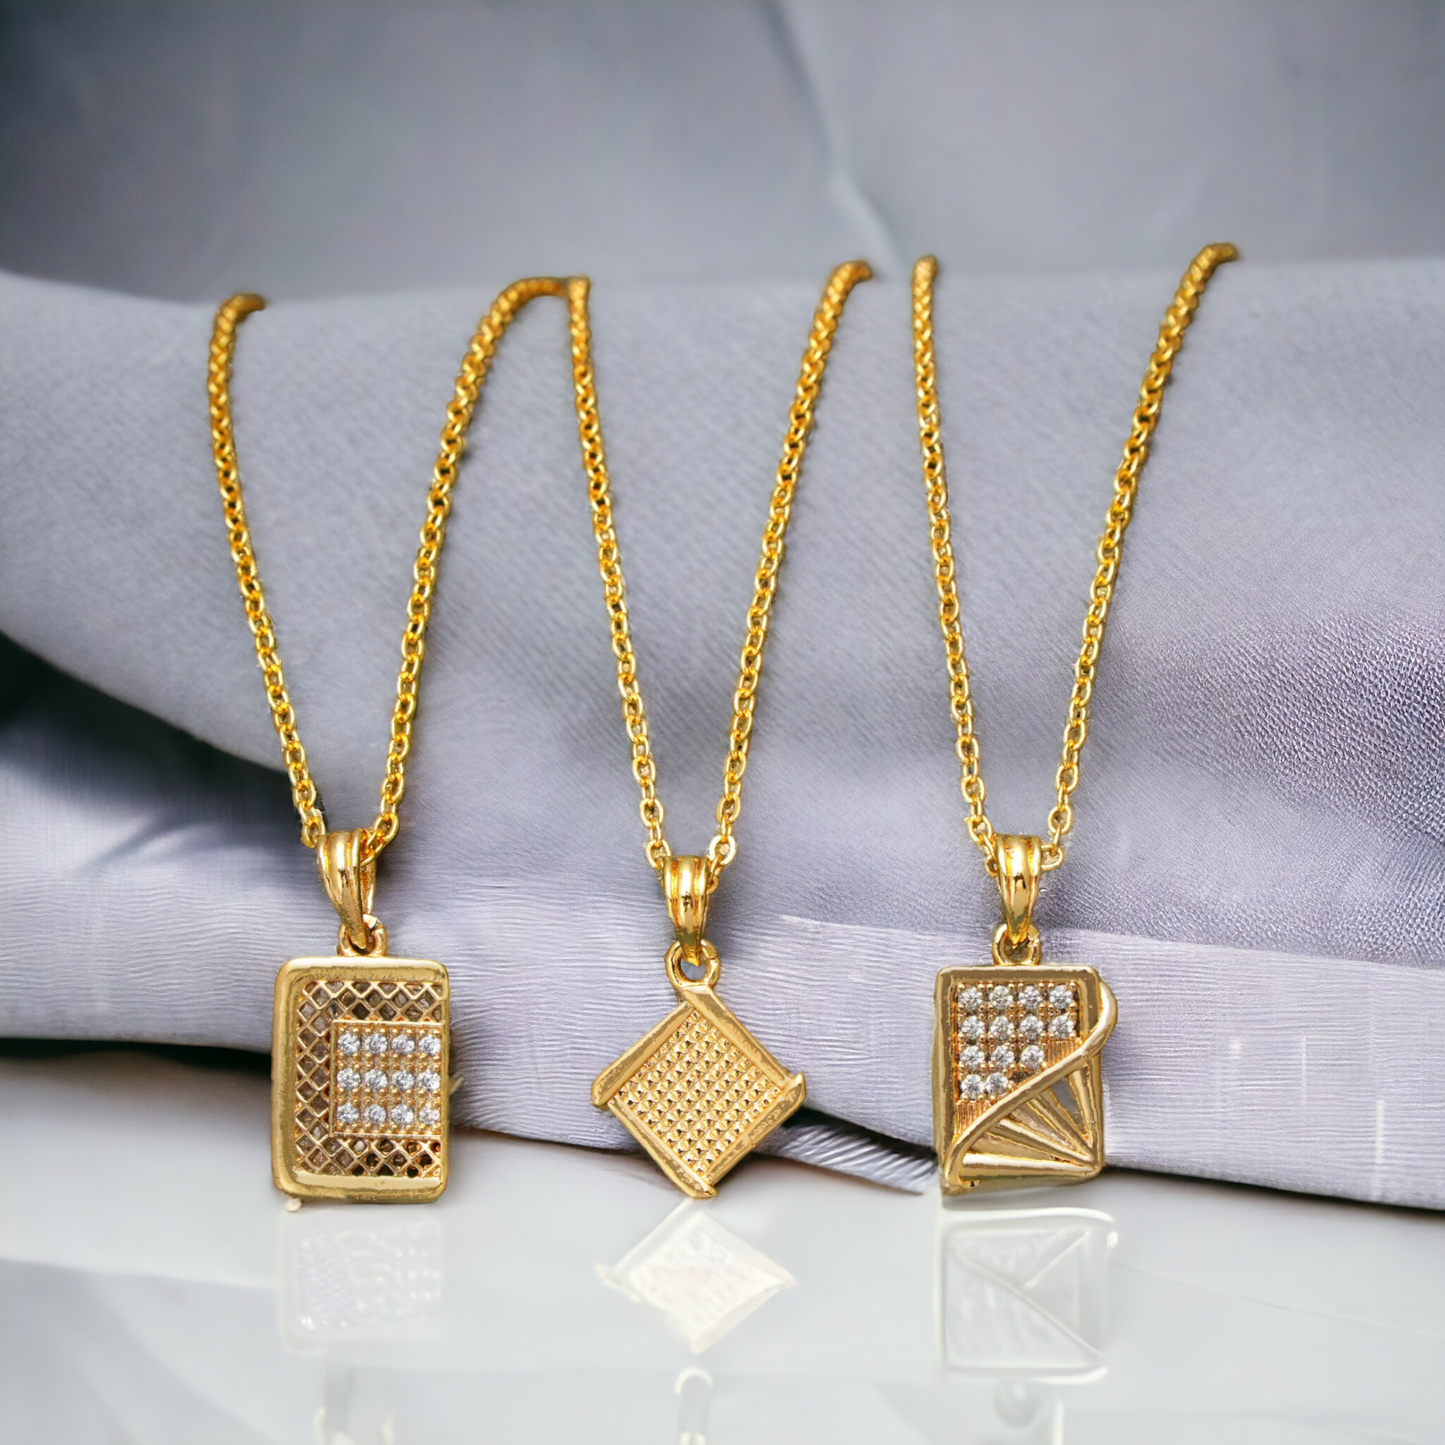 Gold Plated Square Pendant Chains for Daily Wear, Perfect for Girls and Women